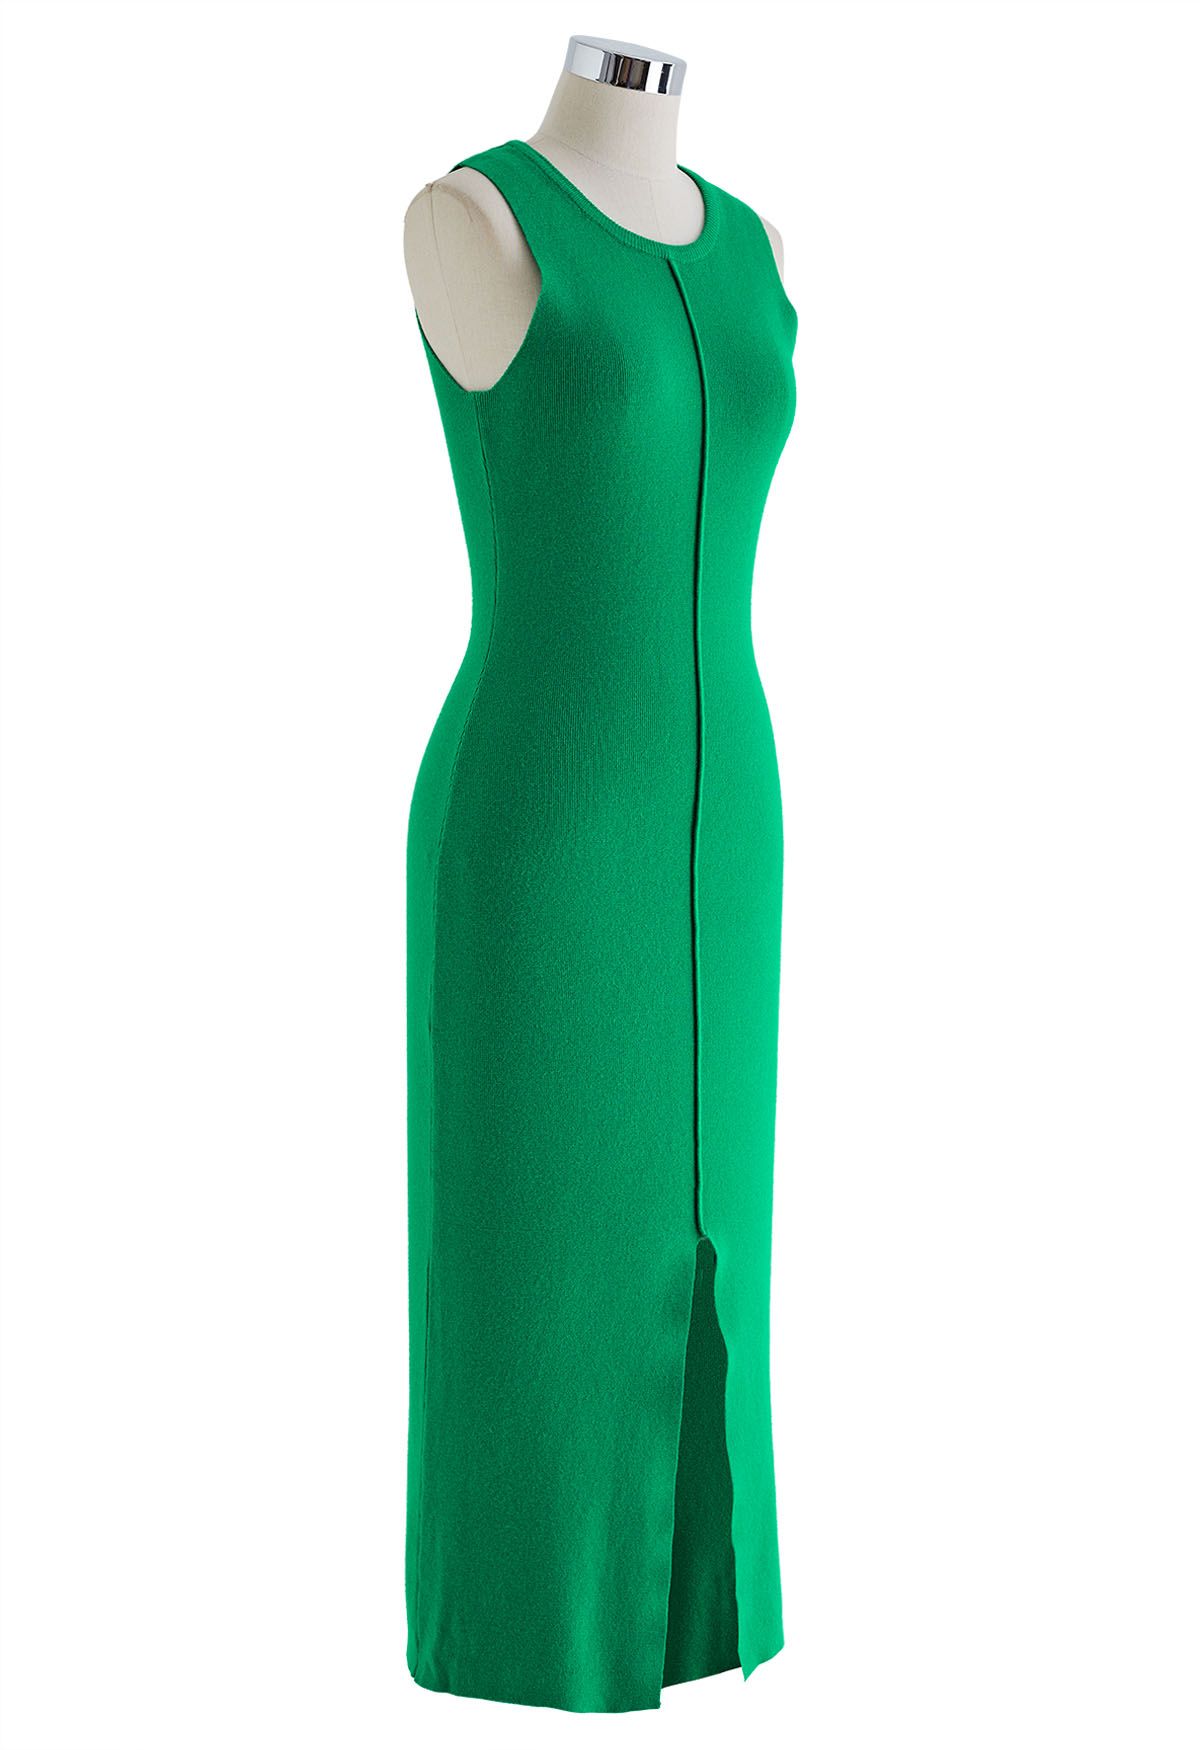 Front Slit Bodycon Knit Dress in Green